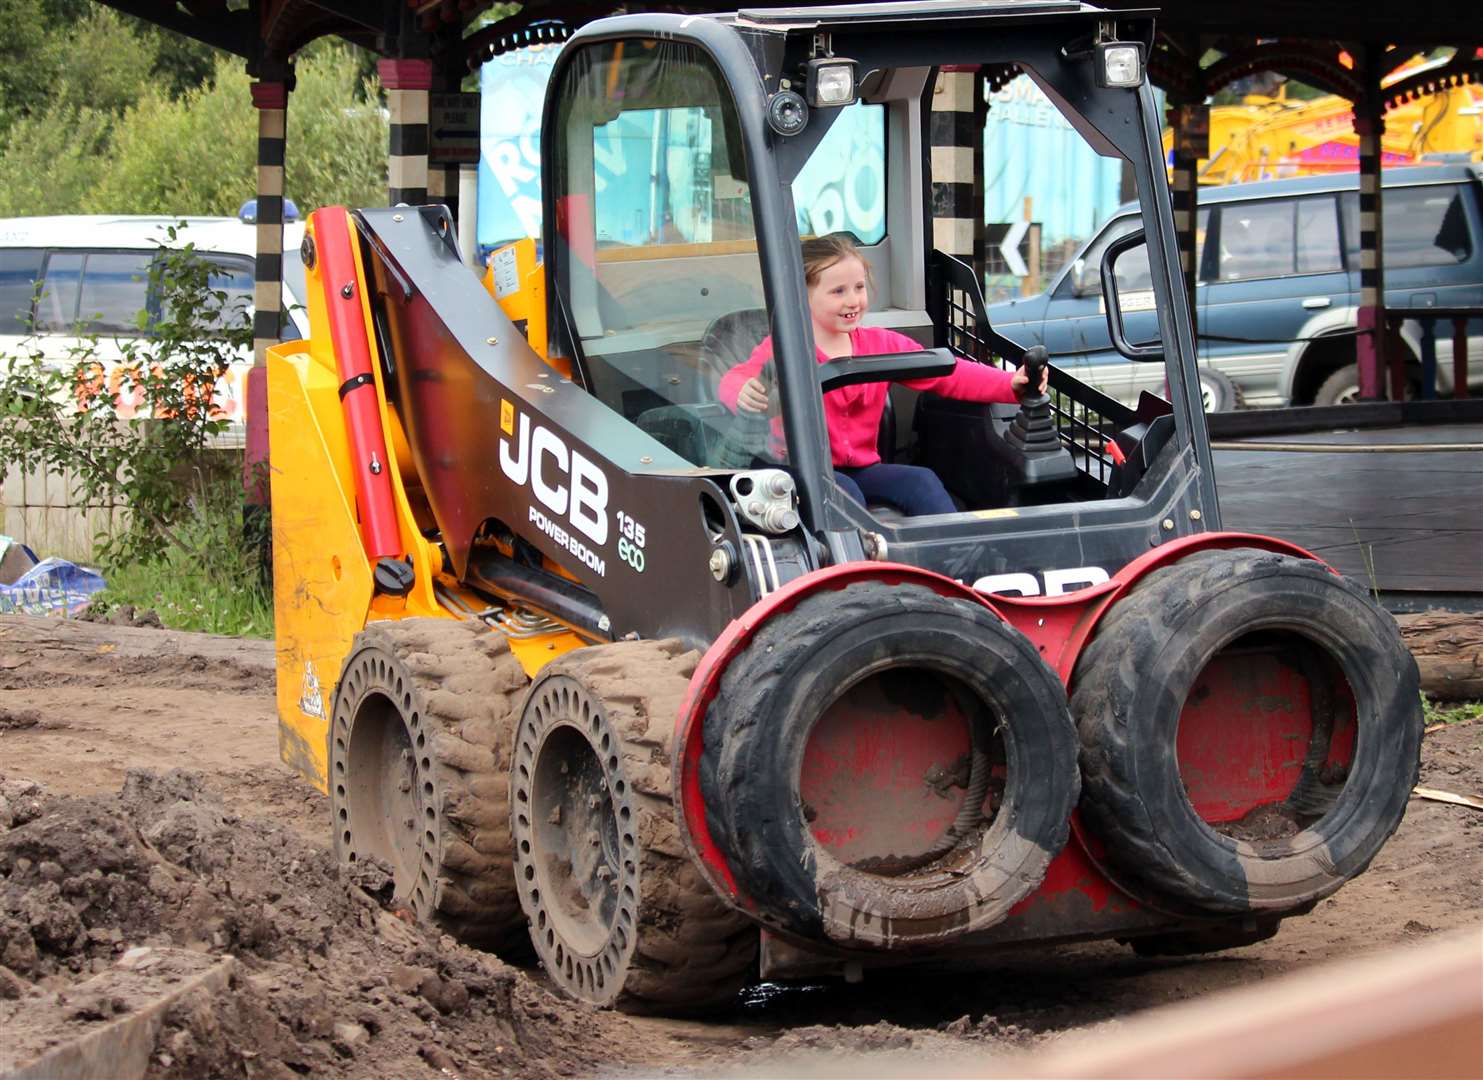 Get driving at Diggerland now that it has reopened